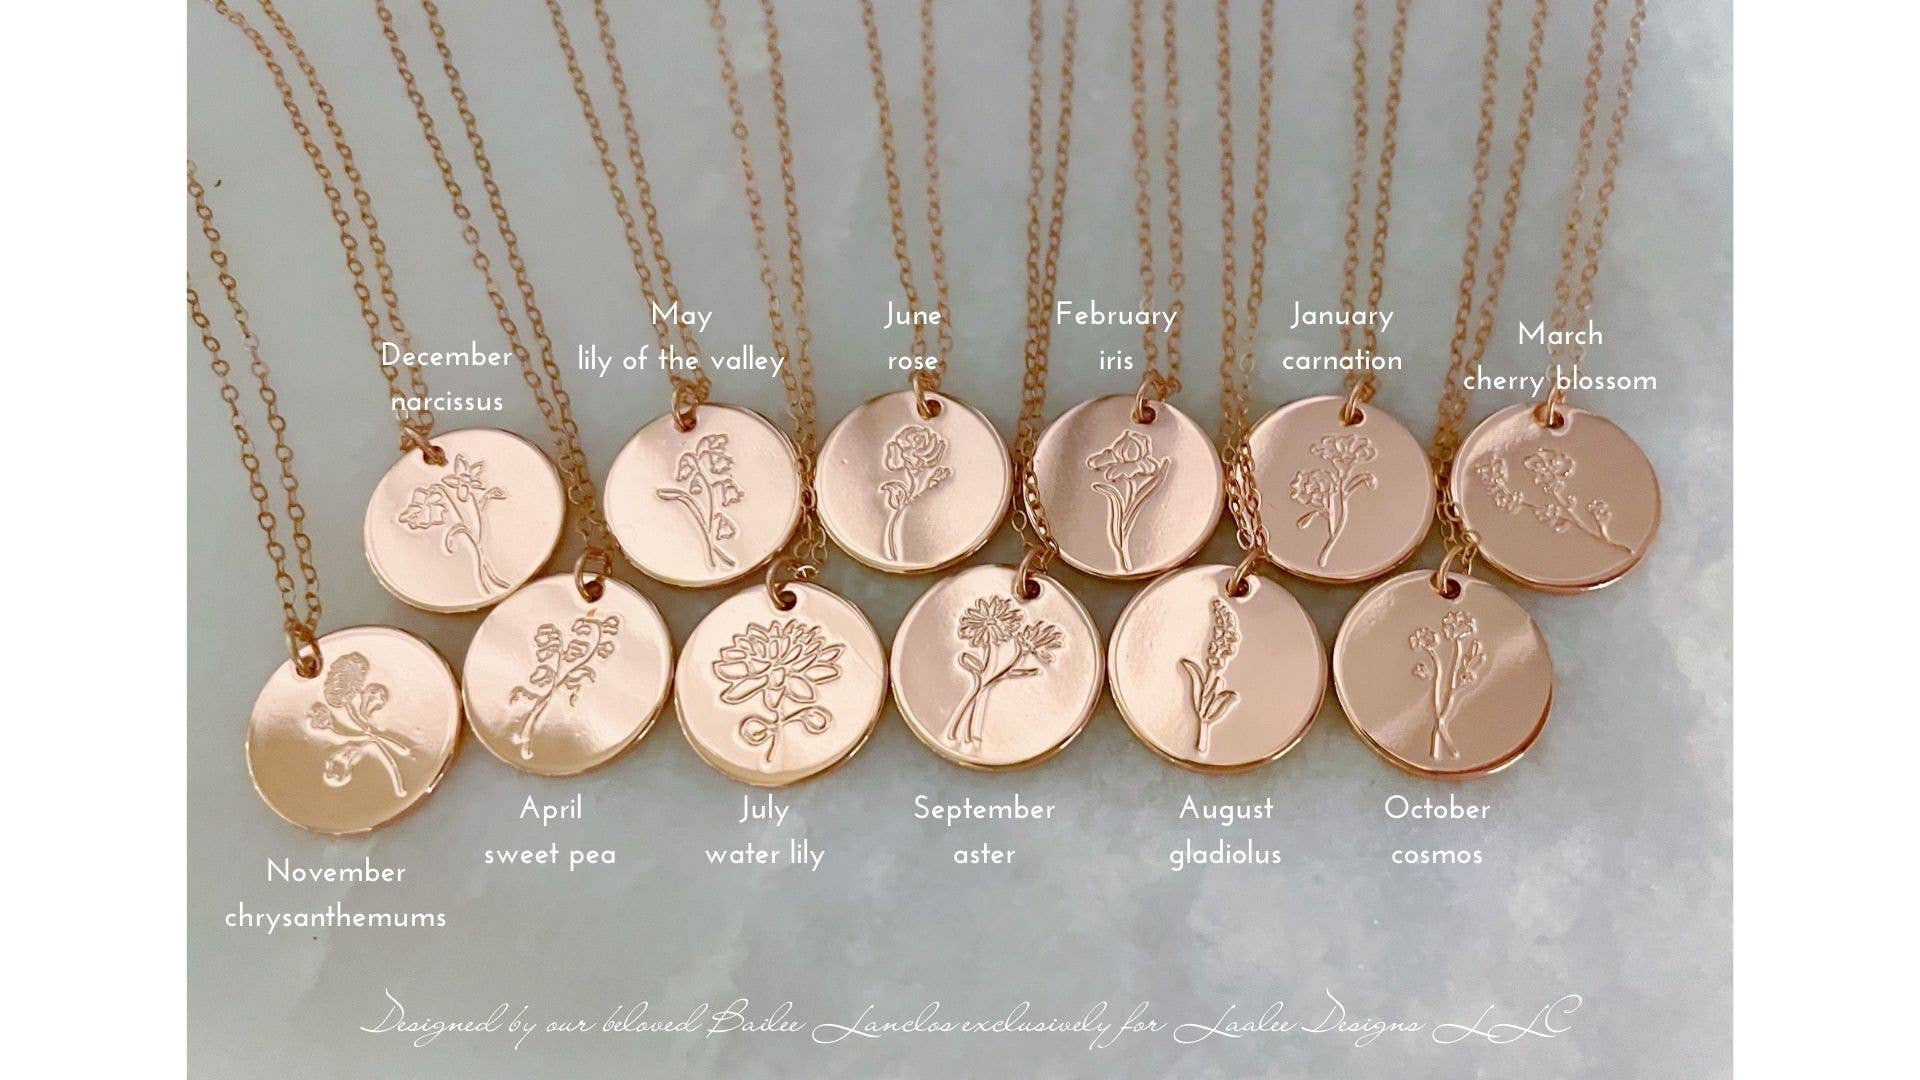 Rose Gold Birth Flower Necklace, Mothers Day Jewelry Gift: August-gladiolus Spring-Summer Laalee Jewelry